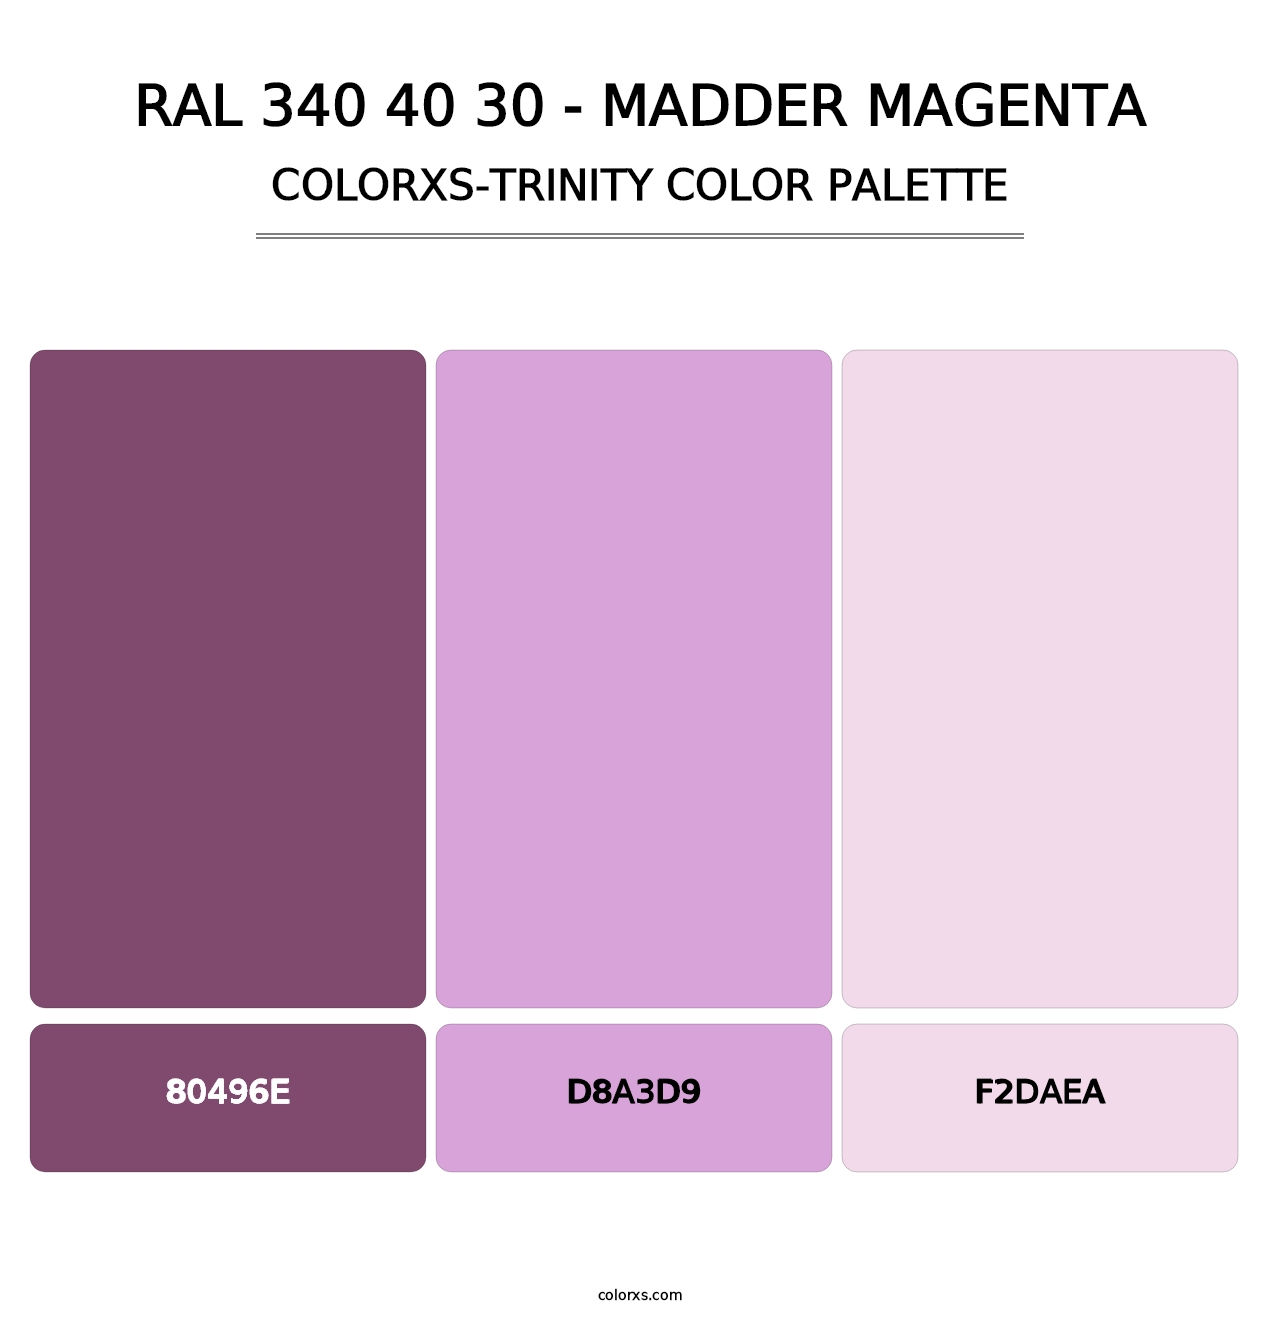 RAL 340 40 30 - Madder Magenta - Colorxs Trinity Palette